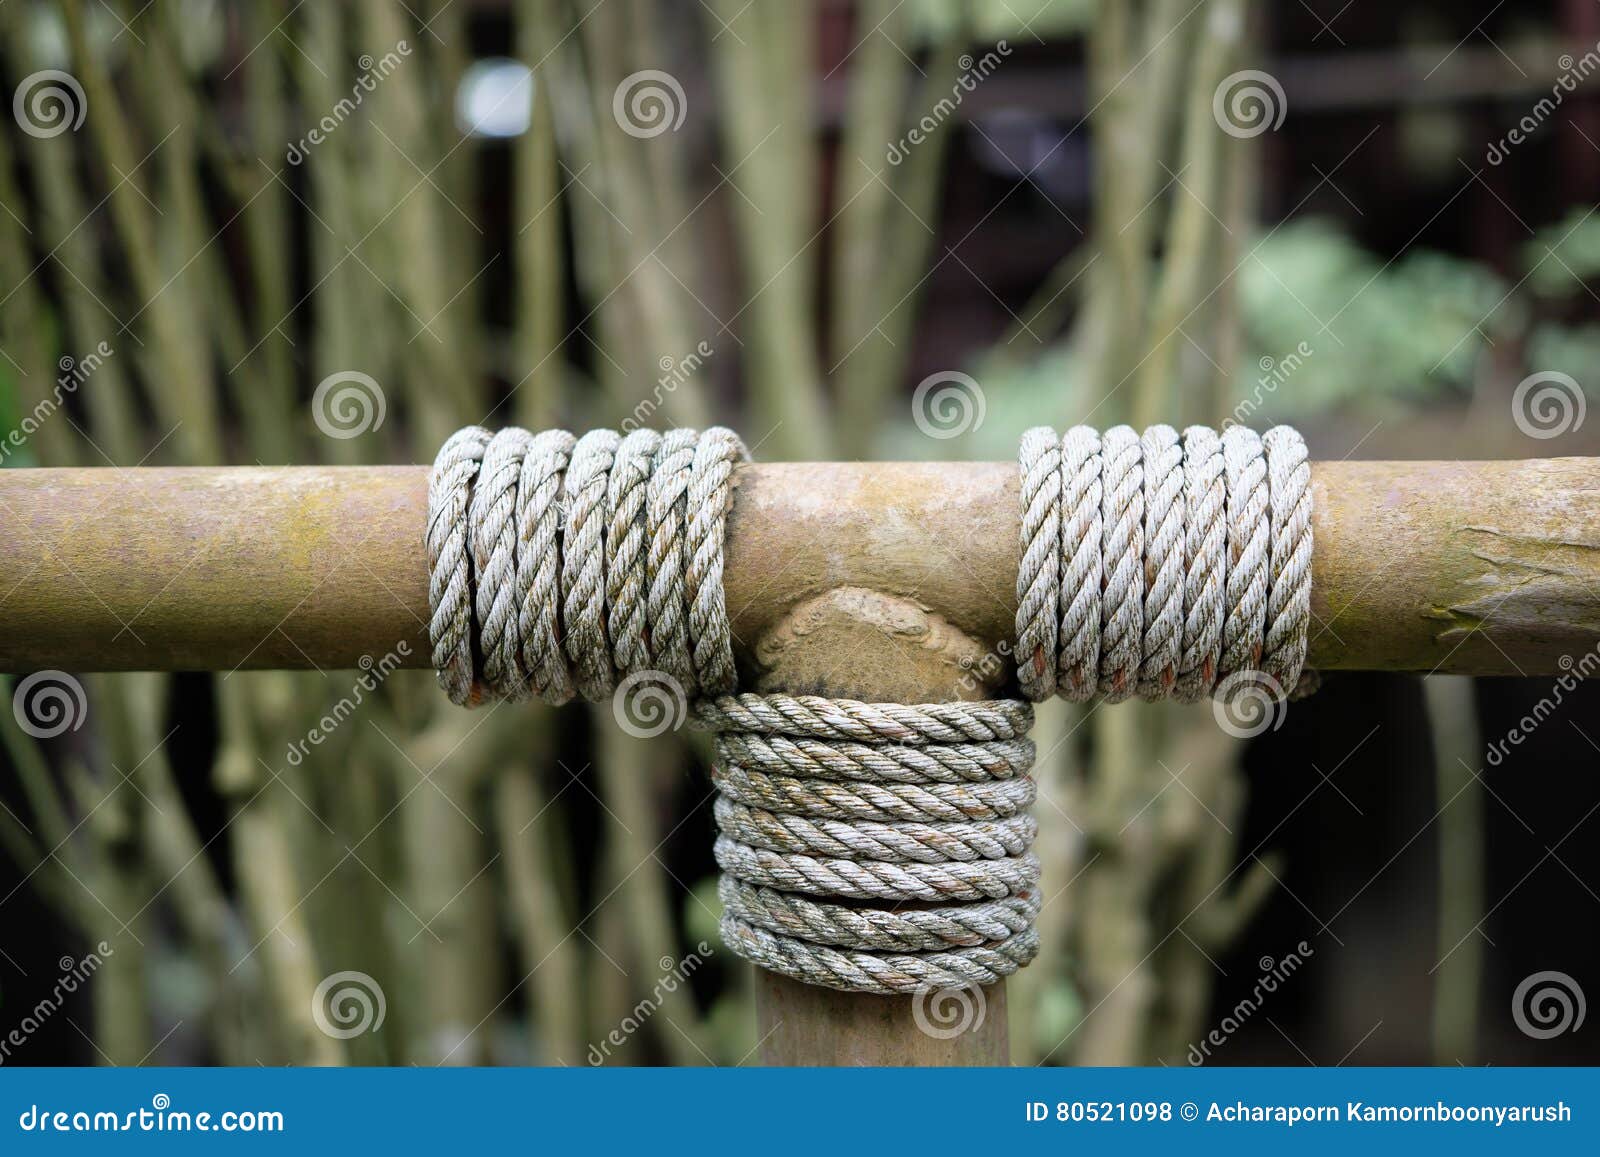 Rope stock photo. Image of abstract, bamboo, pattern - 80521098